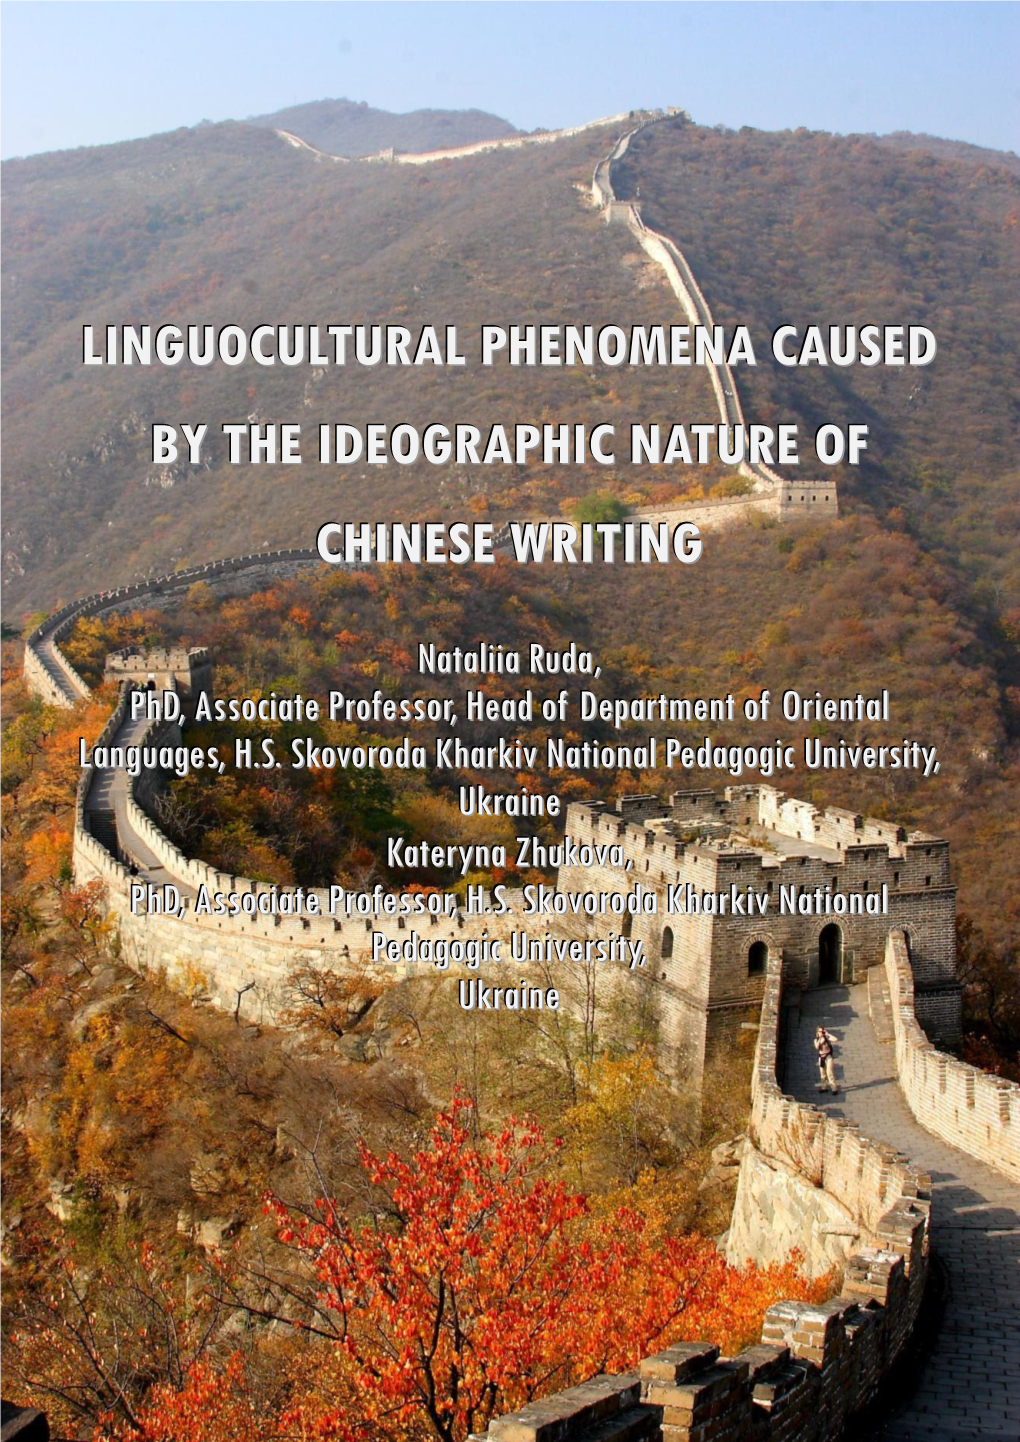 Linguocultural Phenomena Caused by the Ideographic